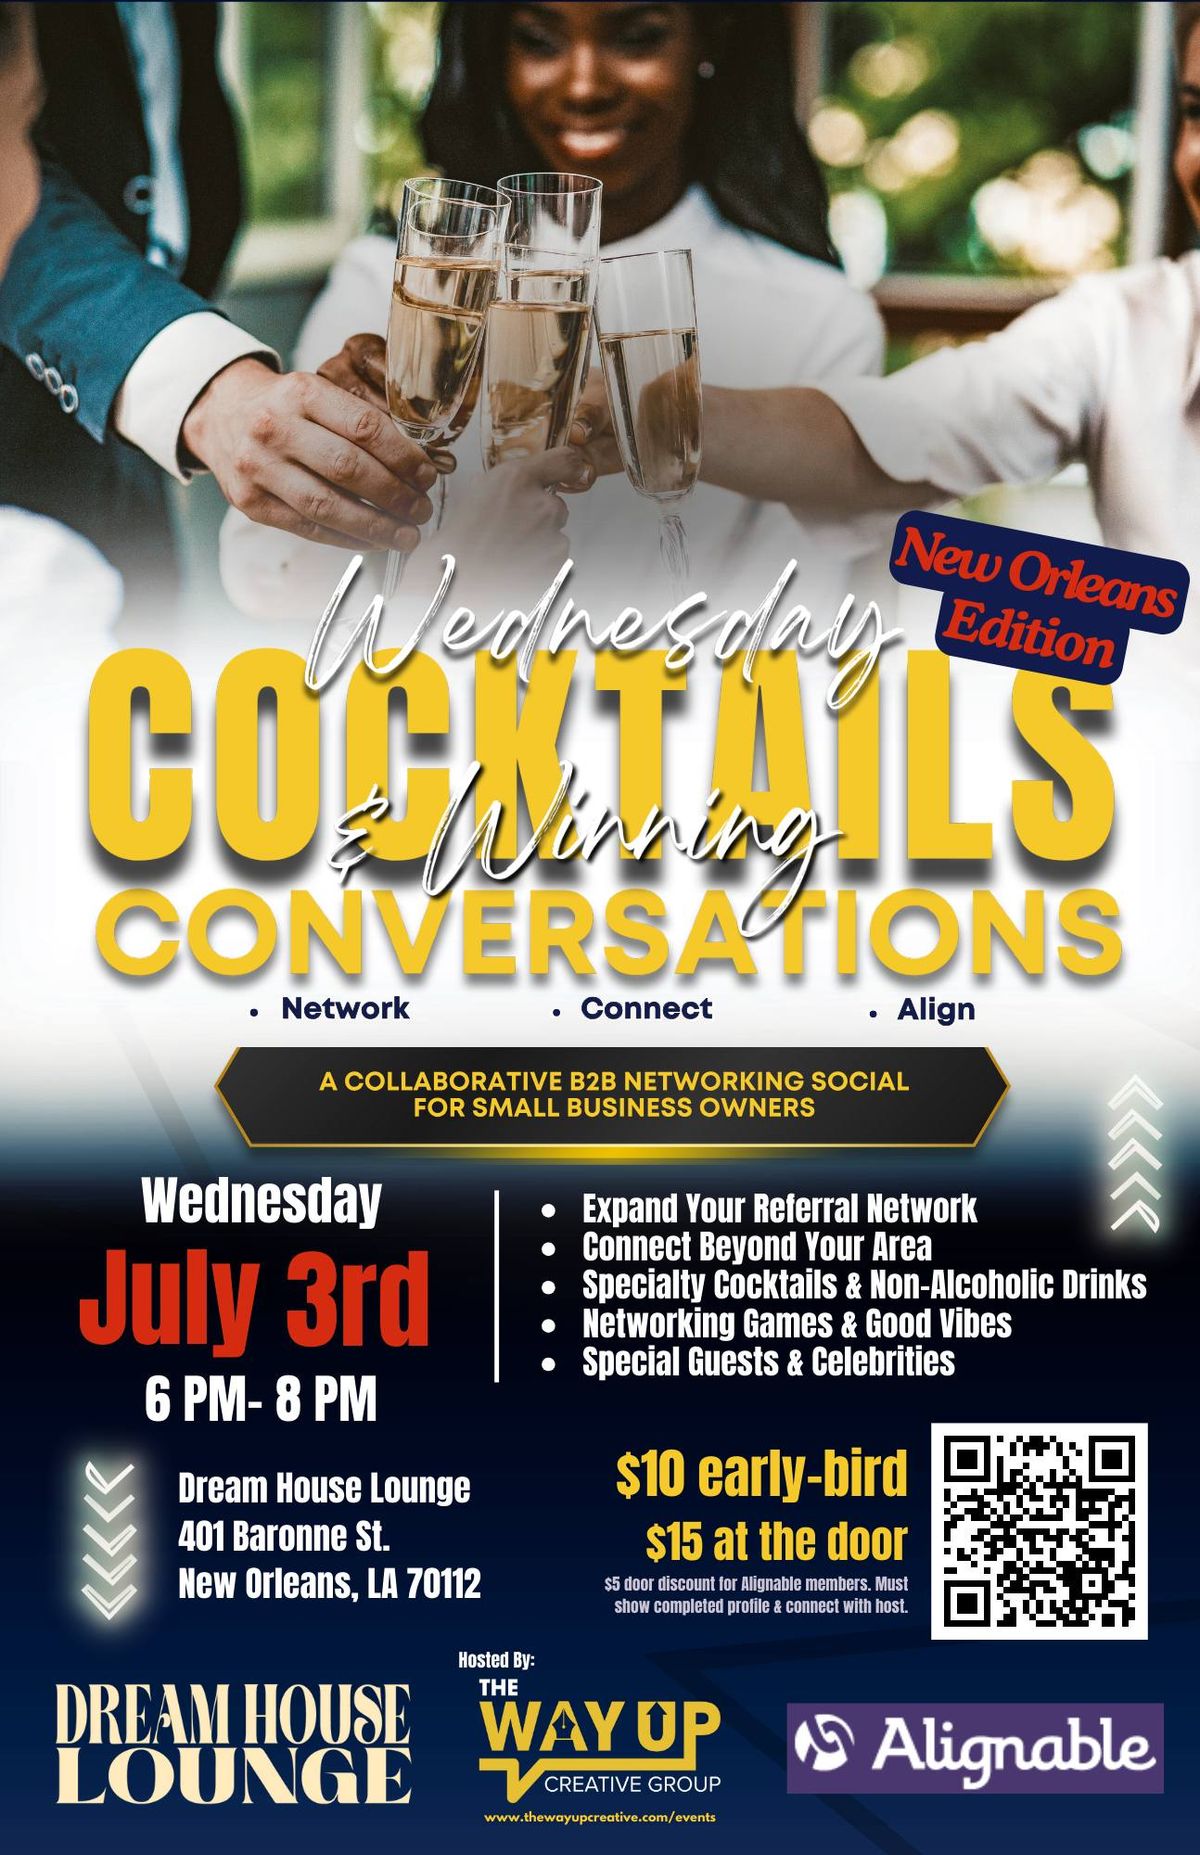 New Orleans Edition: Wednesday Cocktails & Winning Conversations